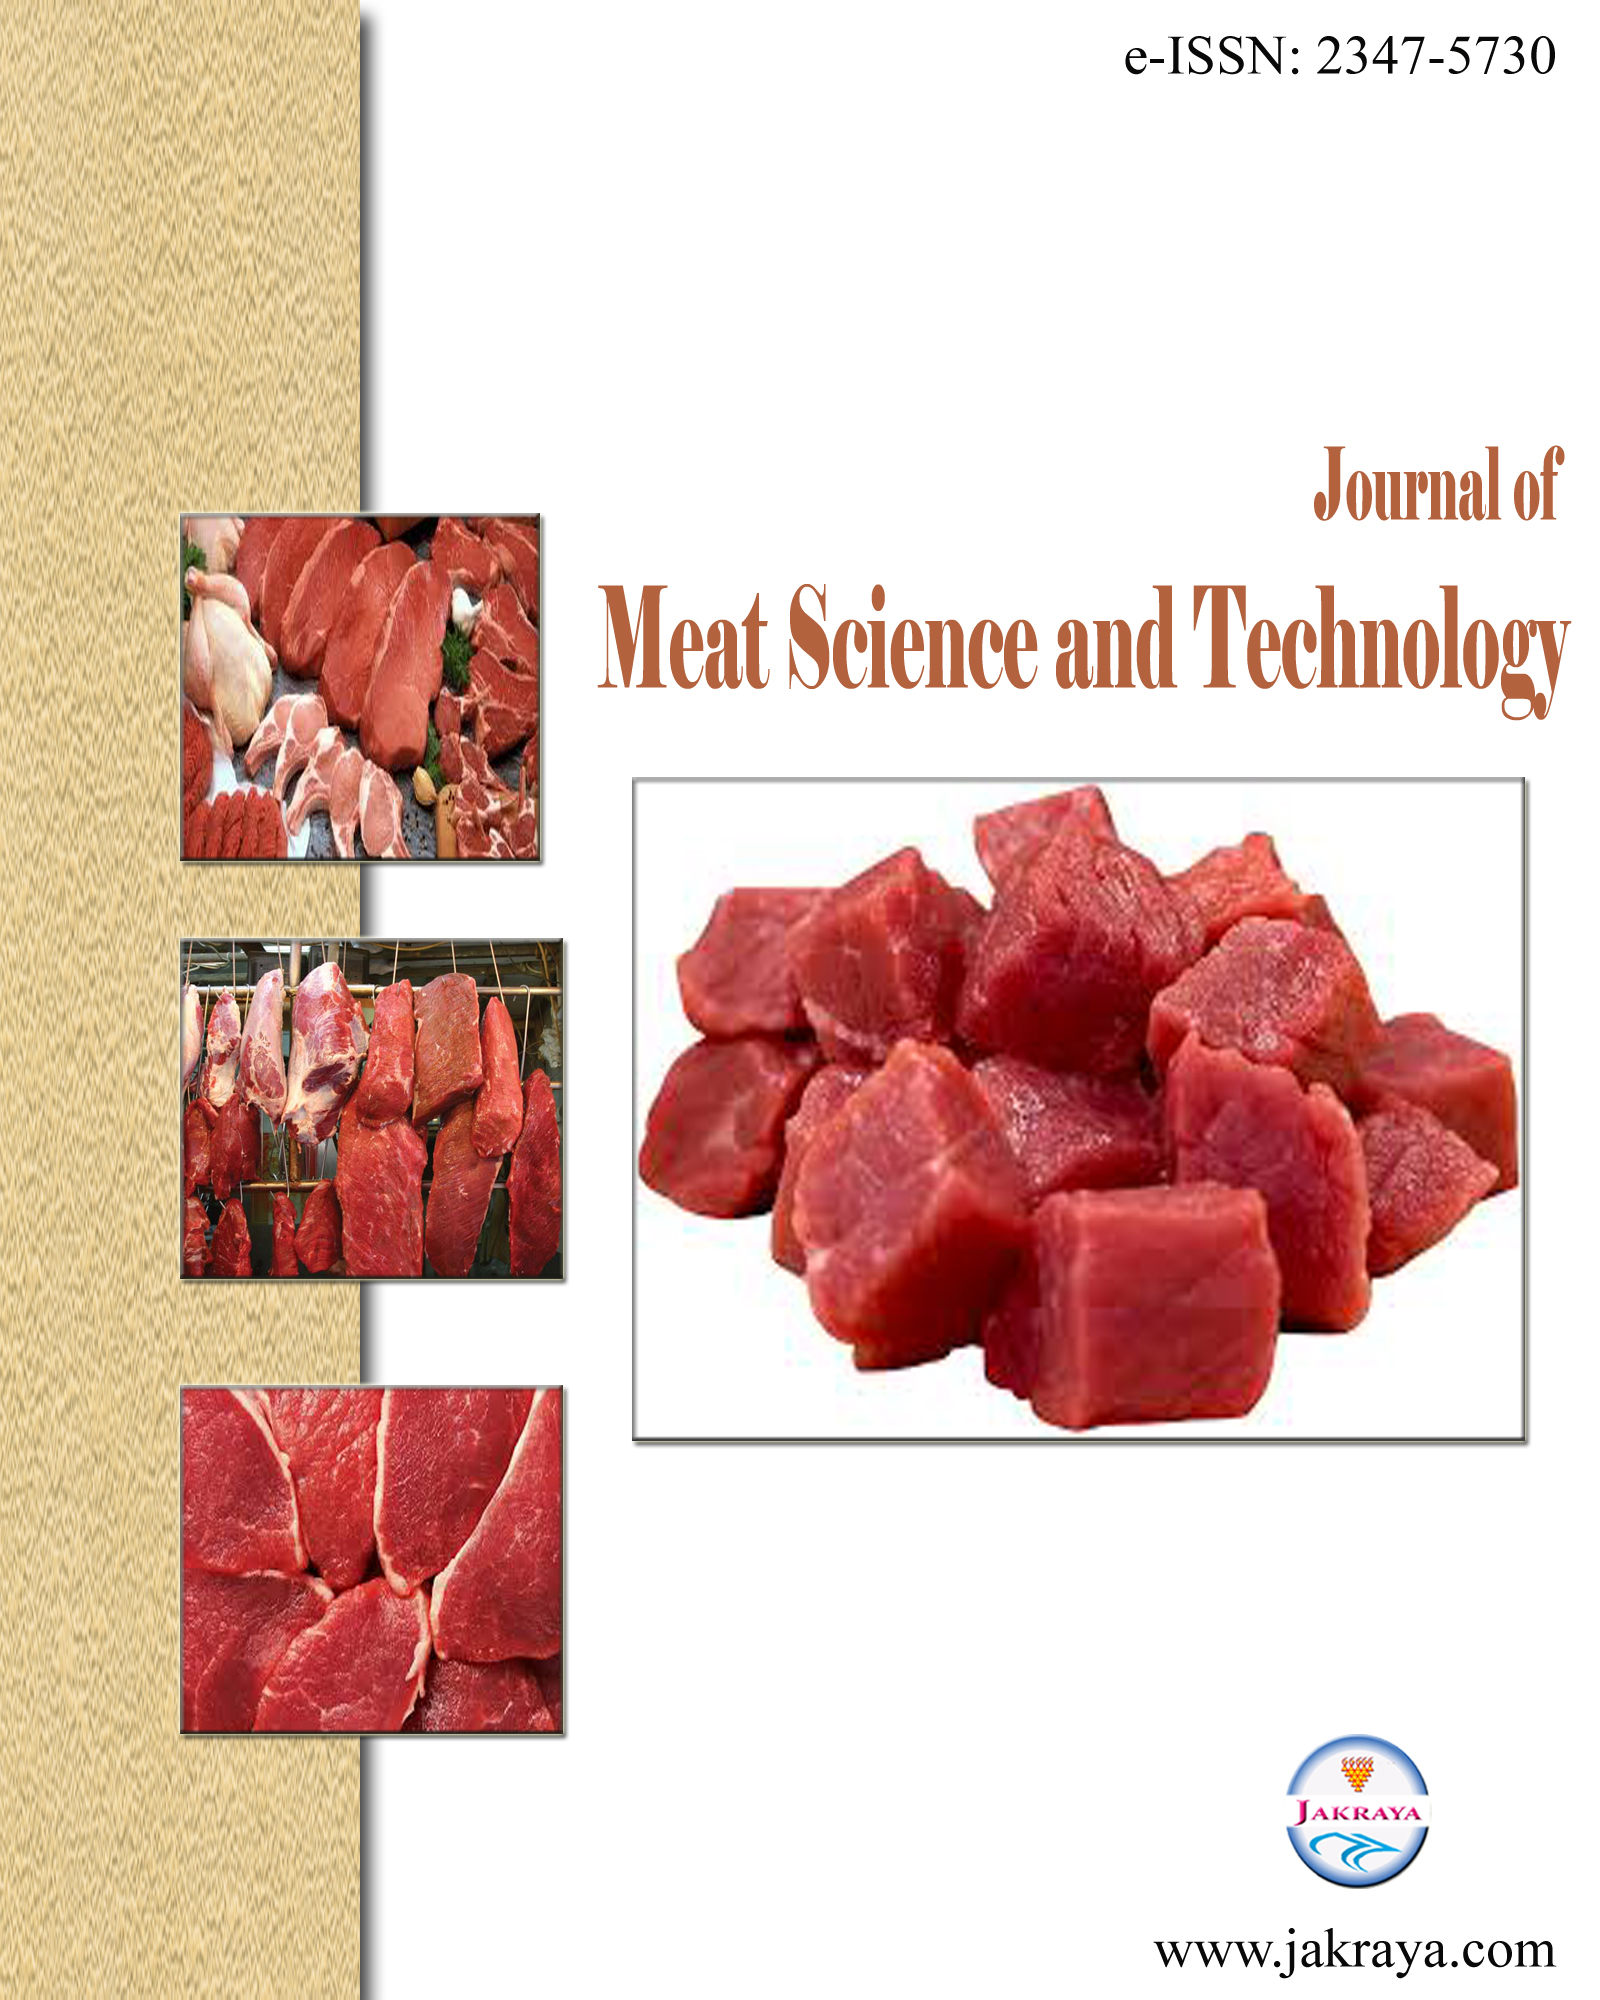 Journal of Meat Science and Technology